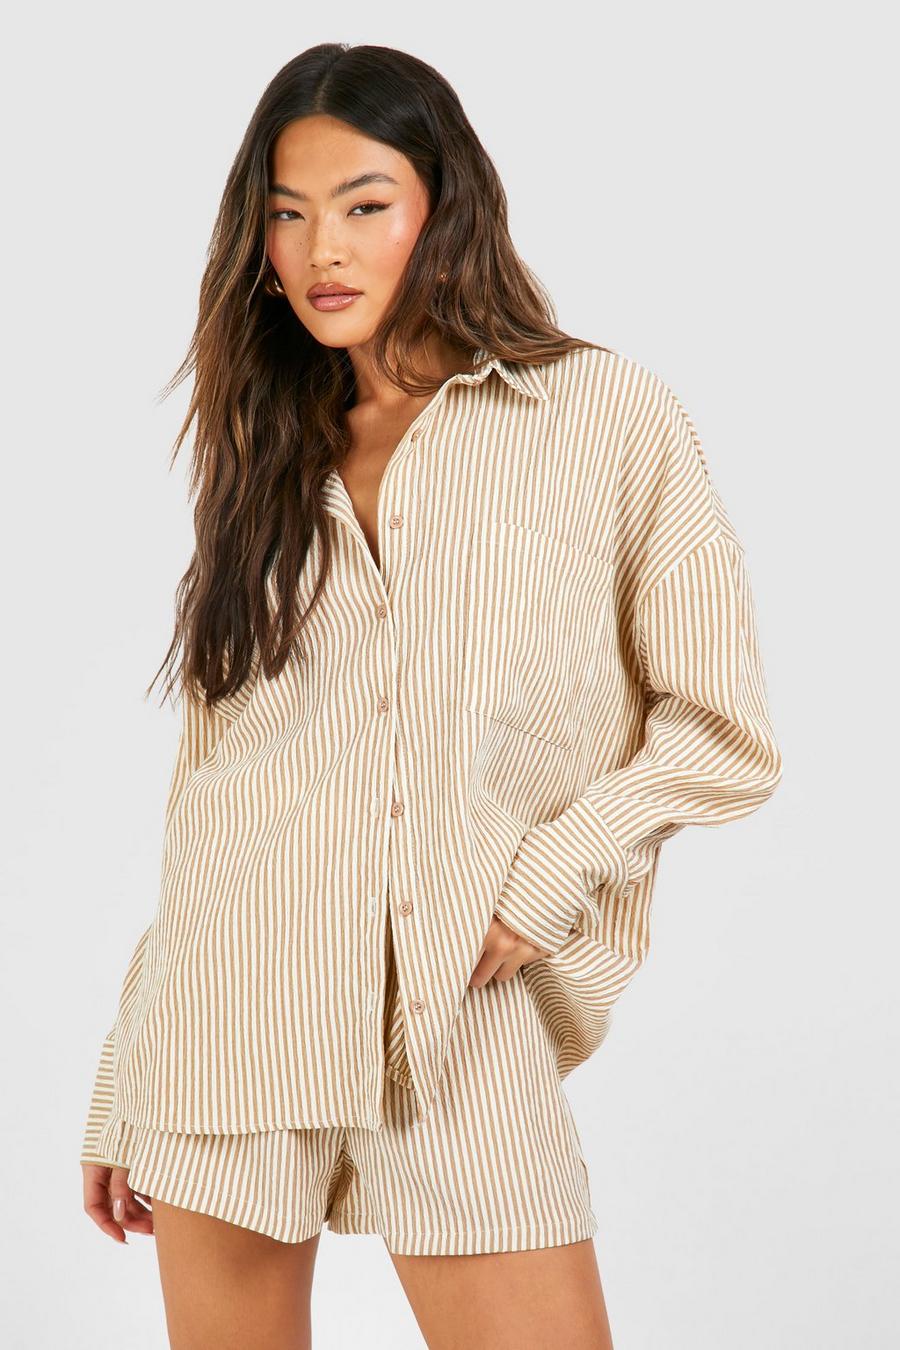 Stone Textured Stripe Relaxed Fit Fantasy Shirt image number 1